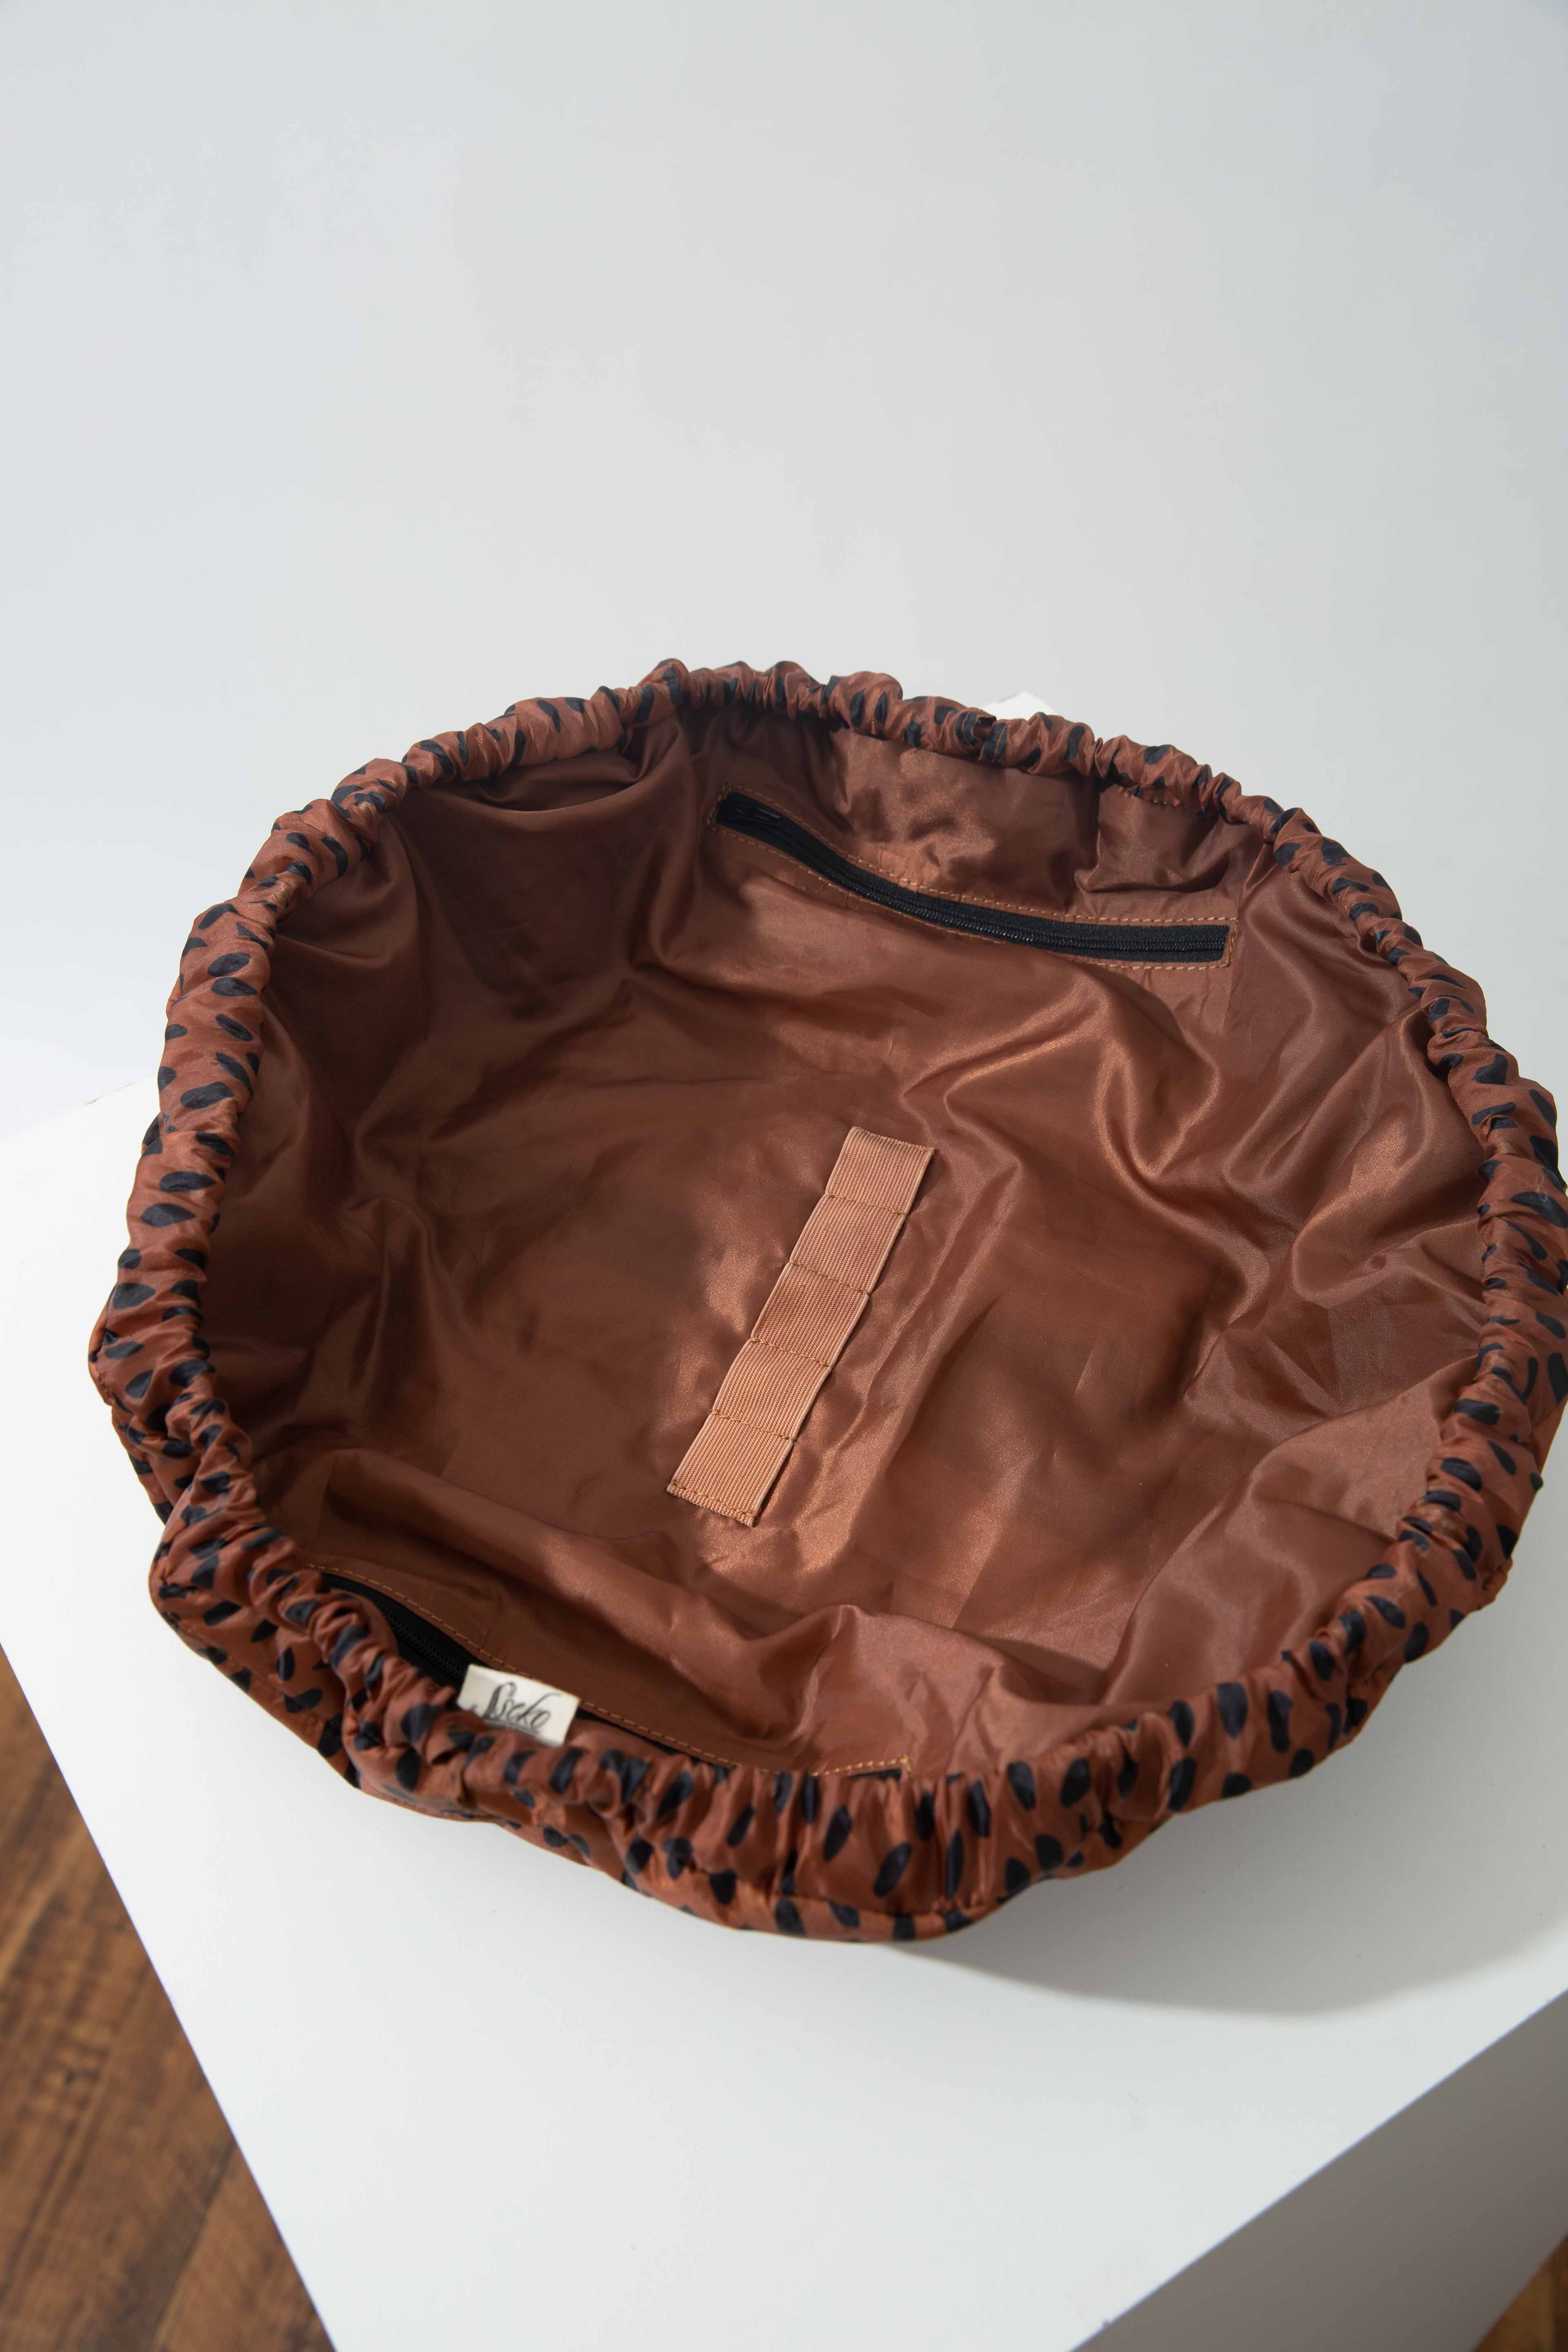 The Catchall Drawstring Pouch sits on a white block and is shown from overhead. It is fully opened, and has a wide round mouth. The interior lining of the pouch is a brown satin. There is a zip pocket stitched into the side of the interior, and there are five small elastic loops stitched to the bottom to hold items in place. 